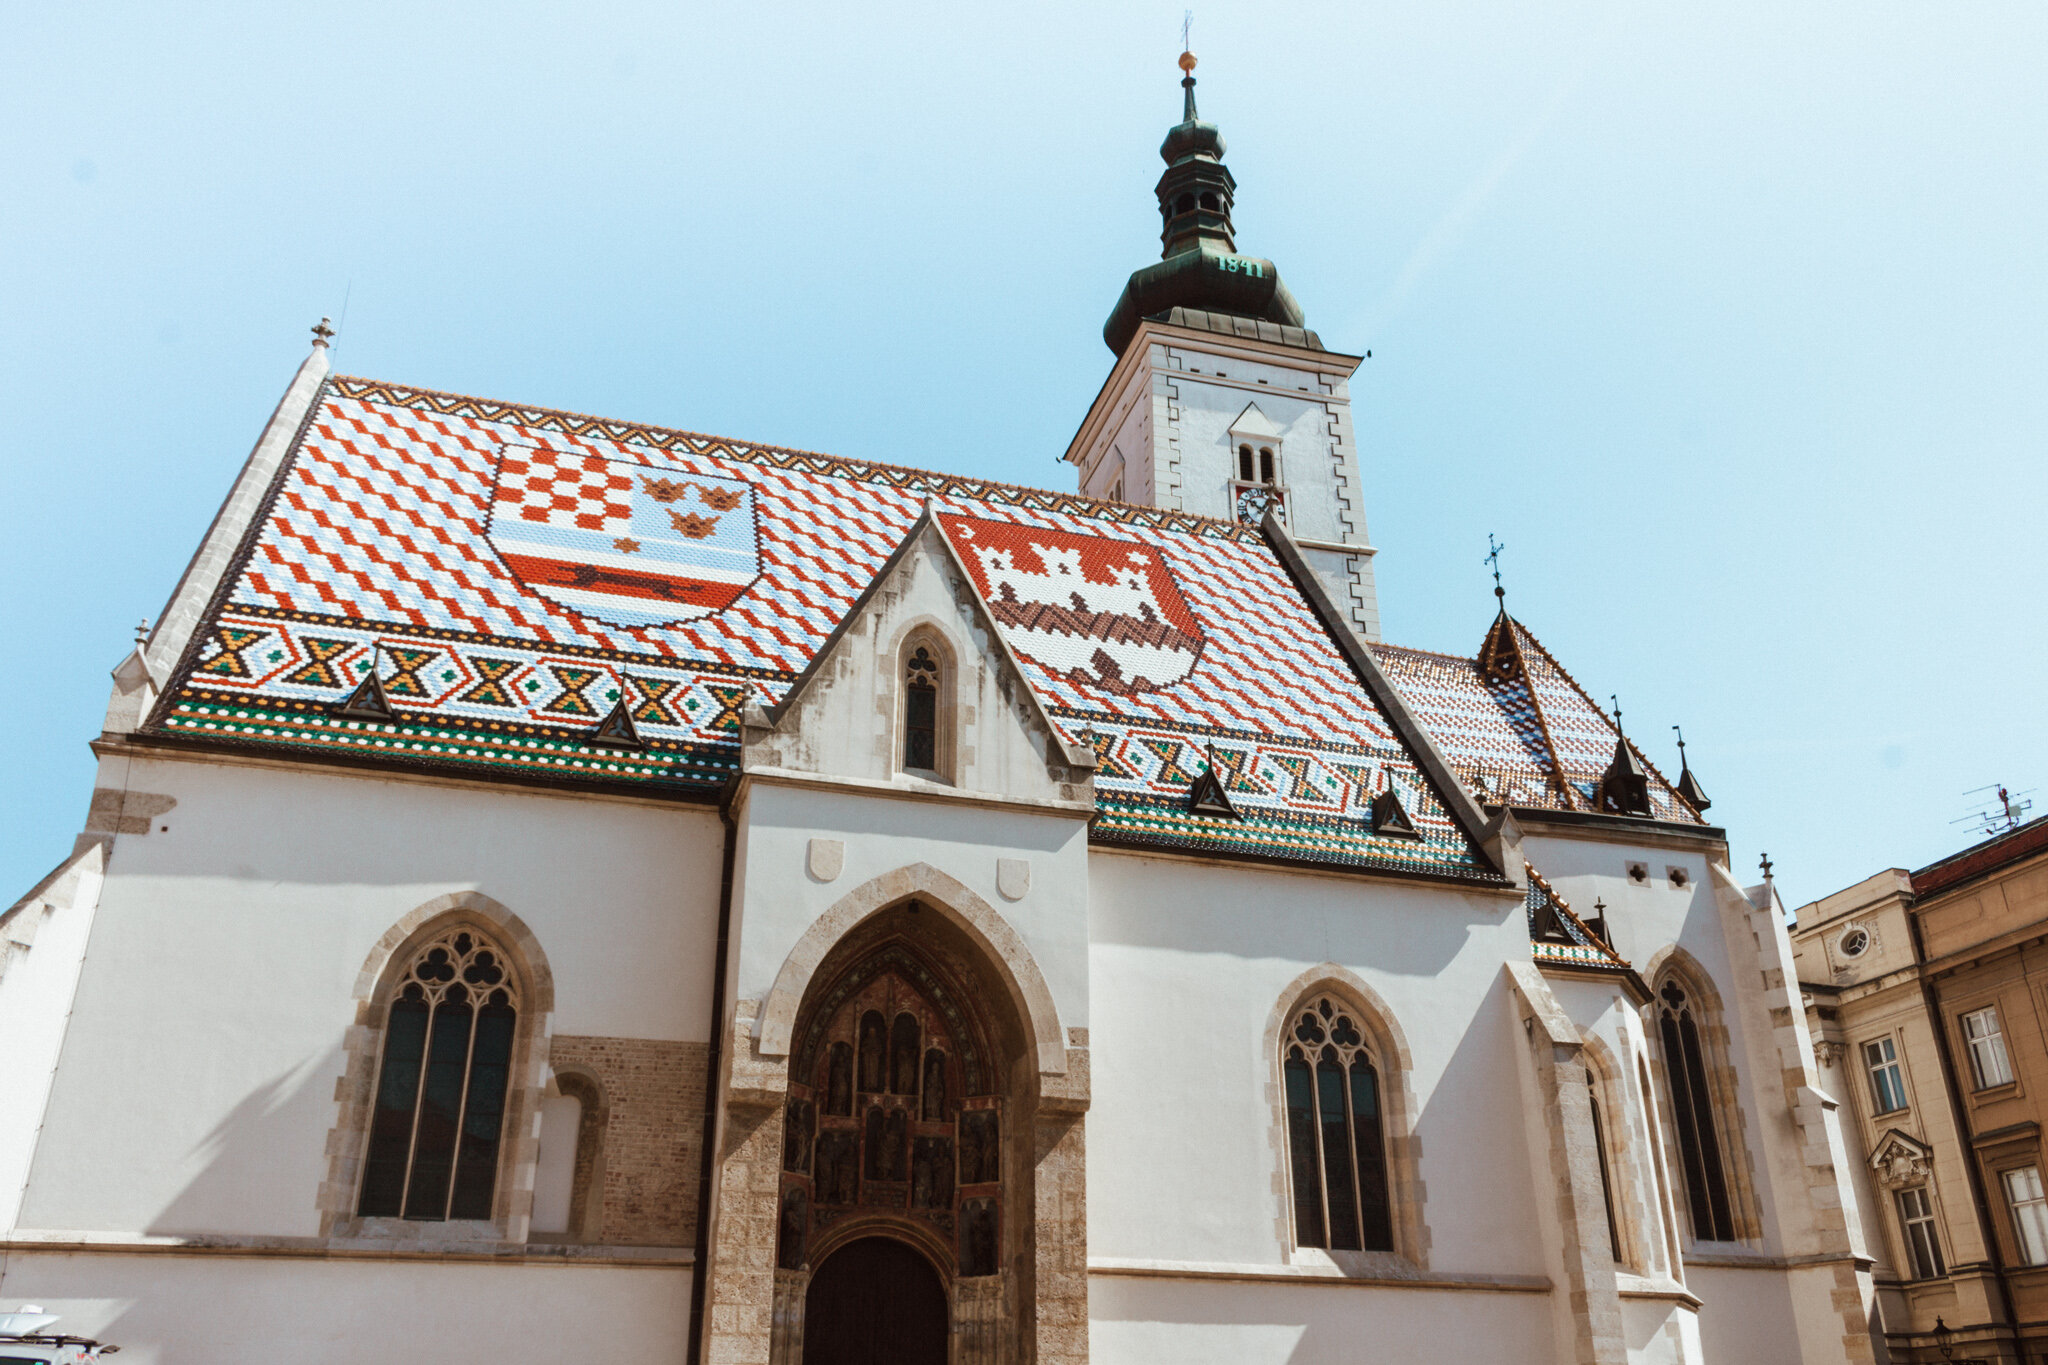  the colorful roof of St. Mark’s, Zagreb, Croatia